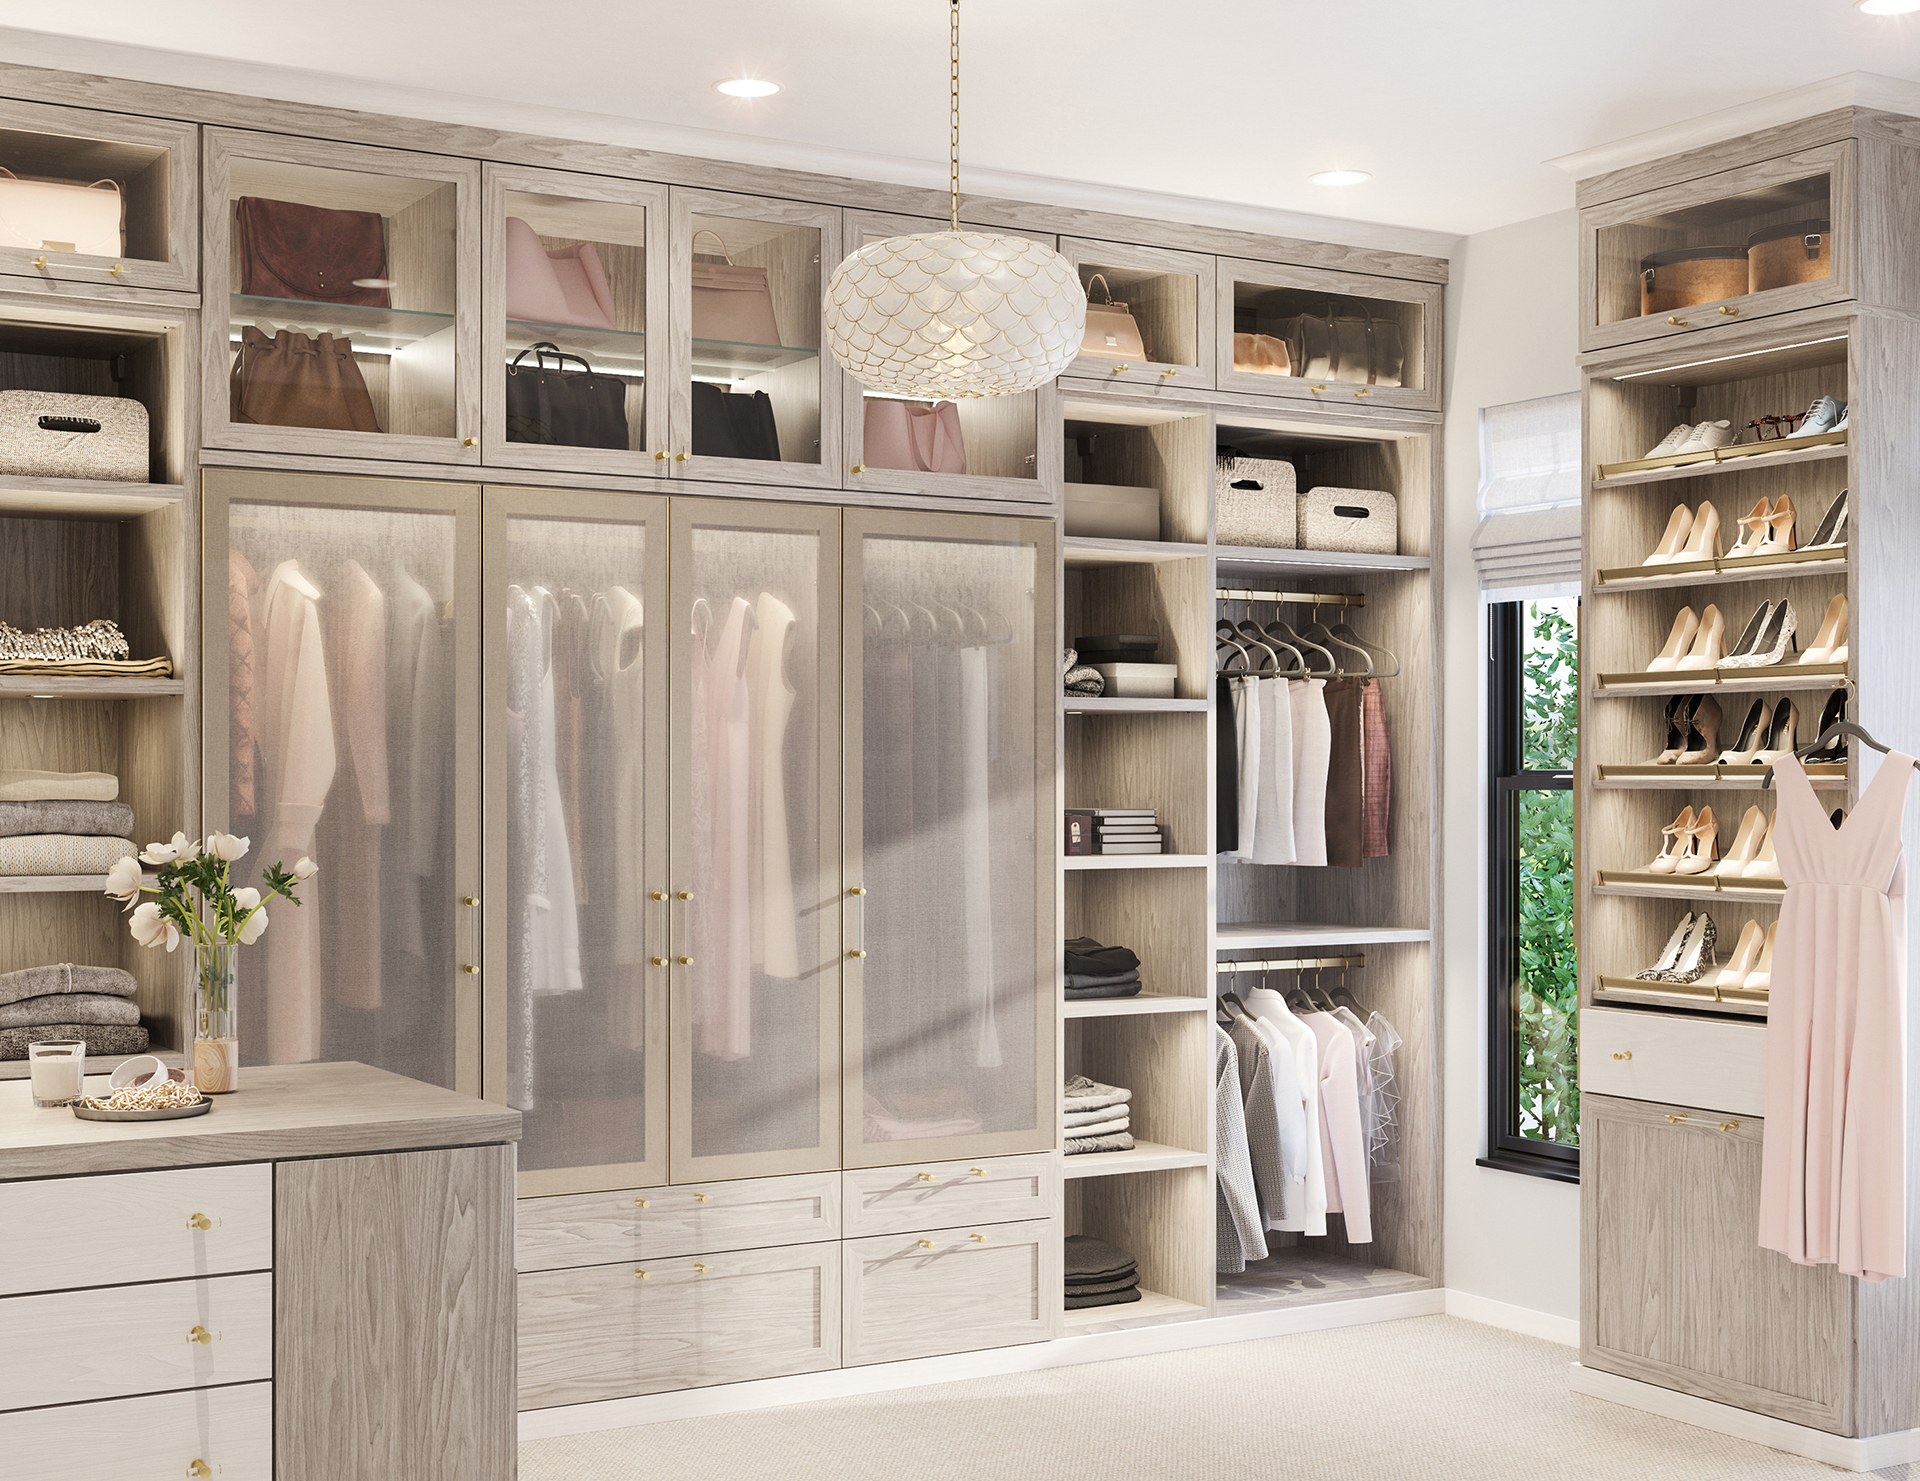 15 Contemporary Walk In Closet Designs That Maximize Space And Style